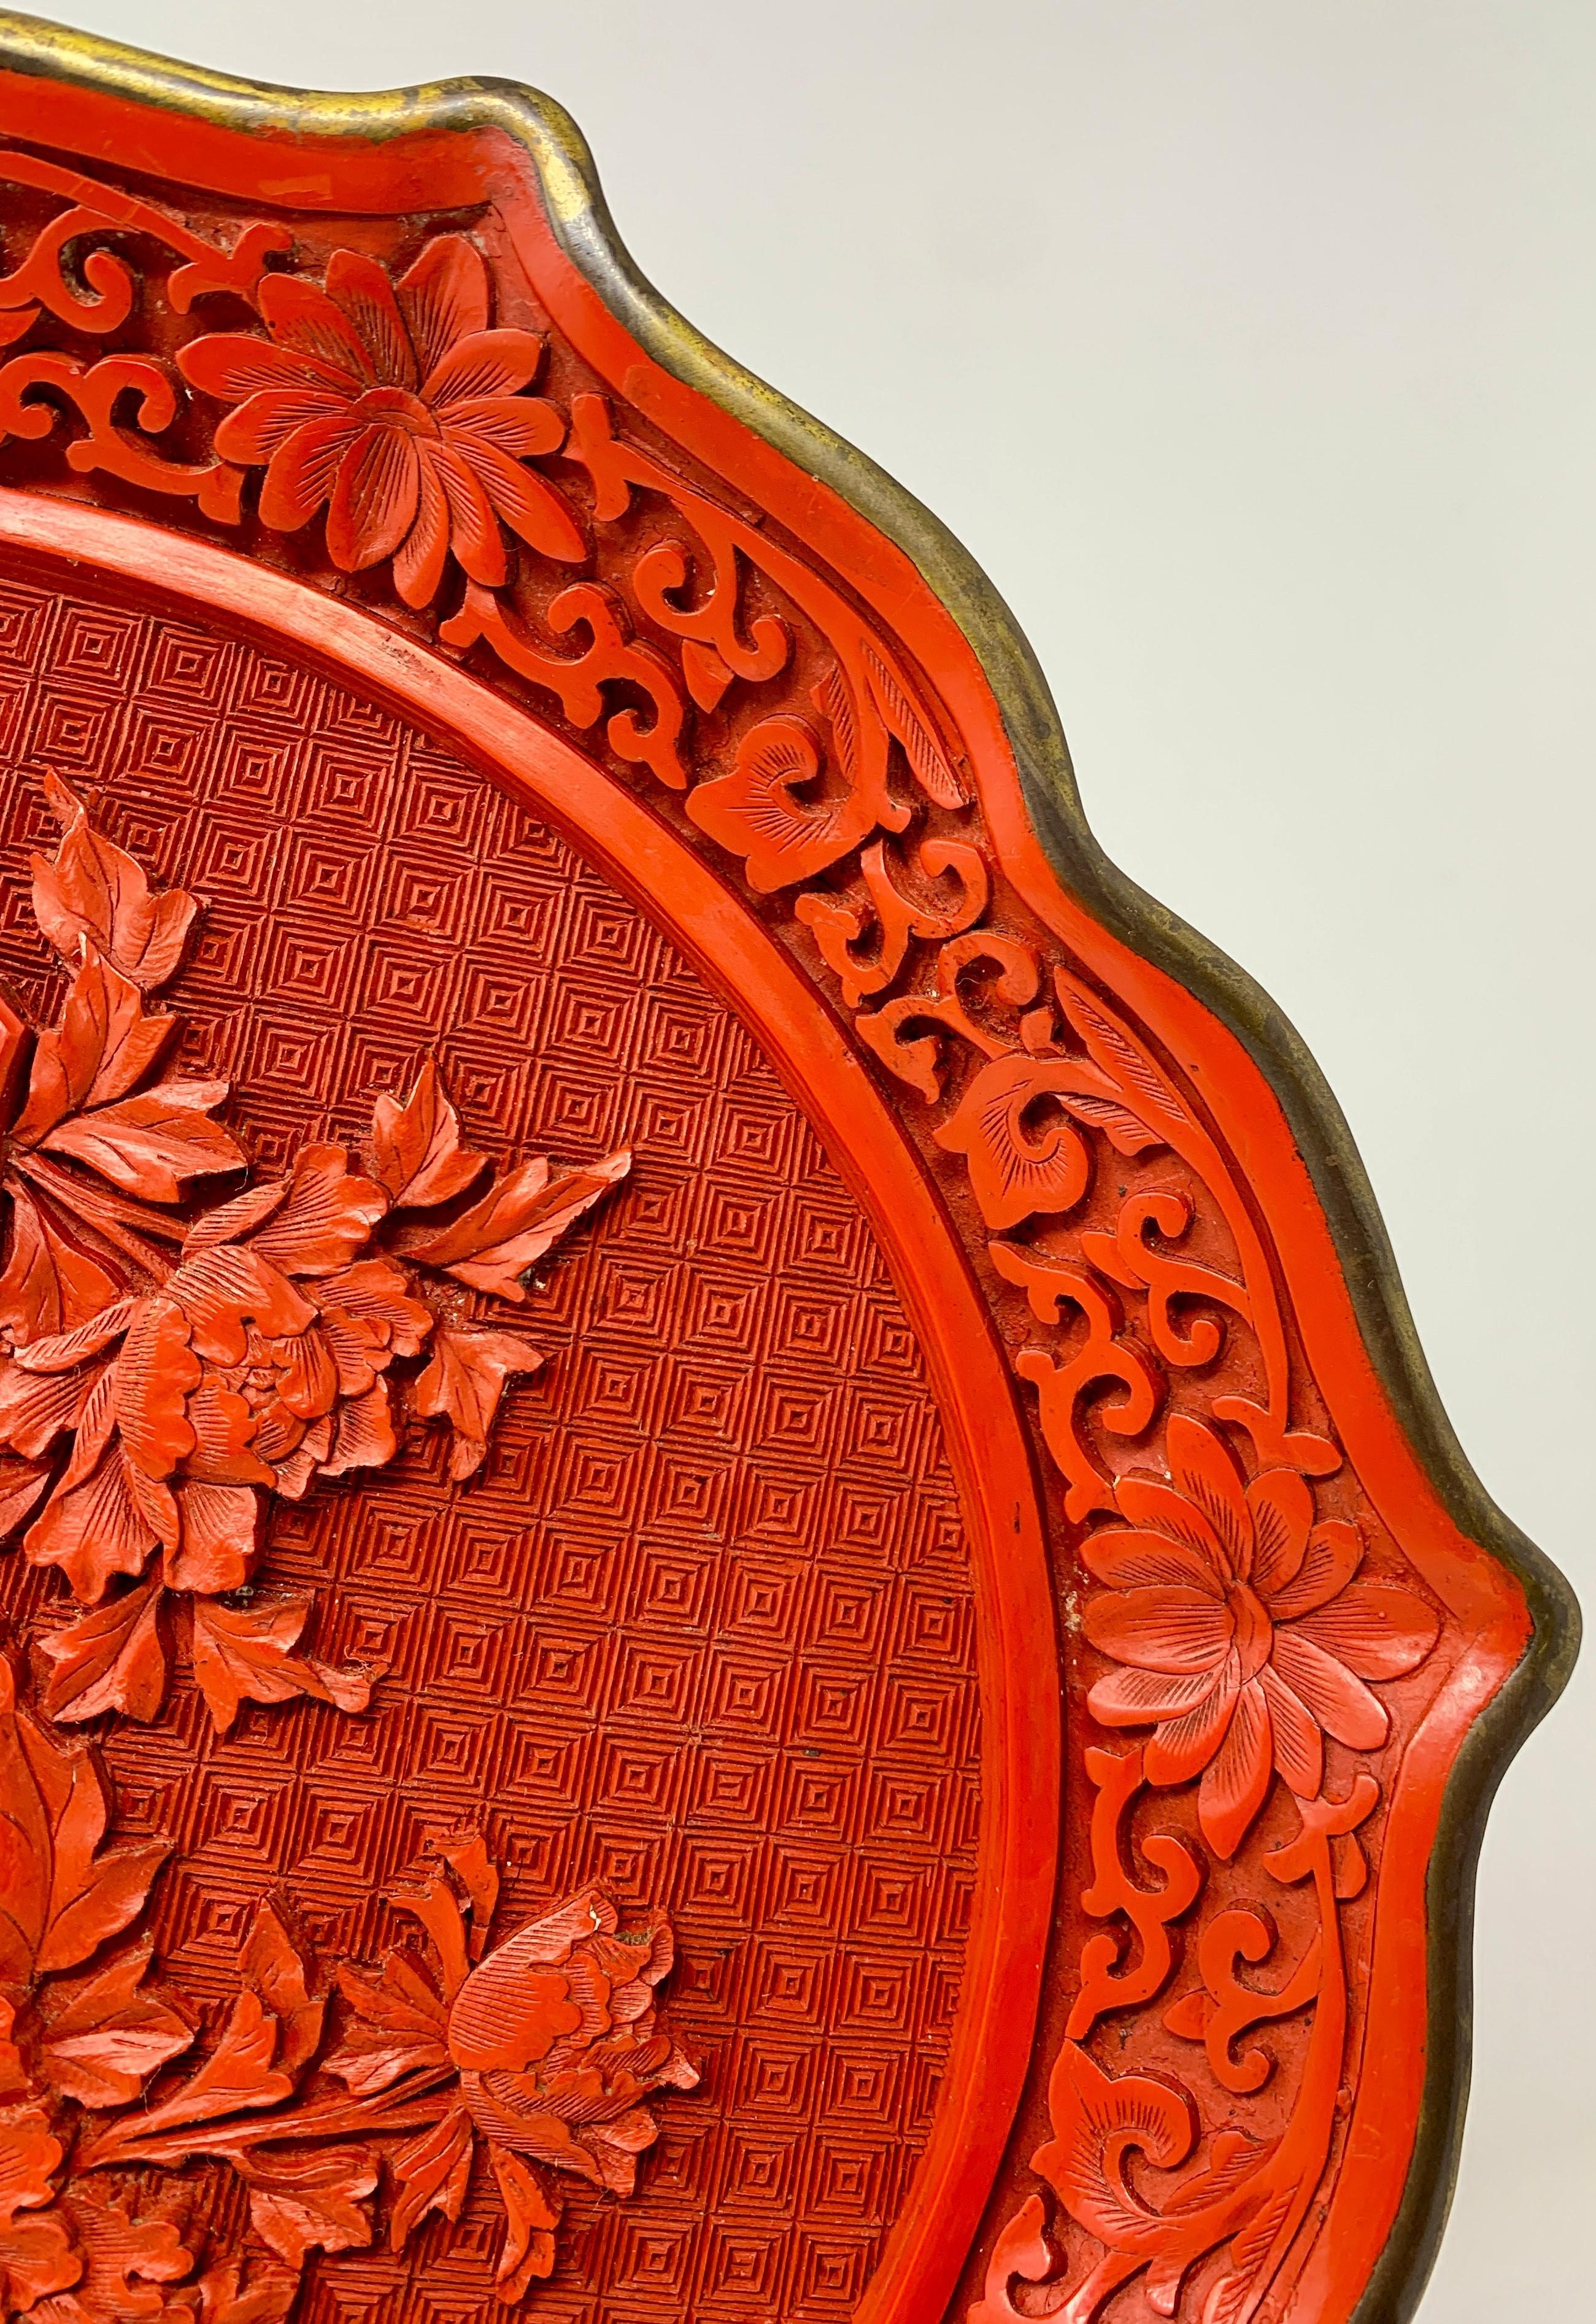 Antique Chinese Cinnabar rare red lacquer carved in relief, circa 1890-1910
OPR146.